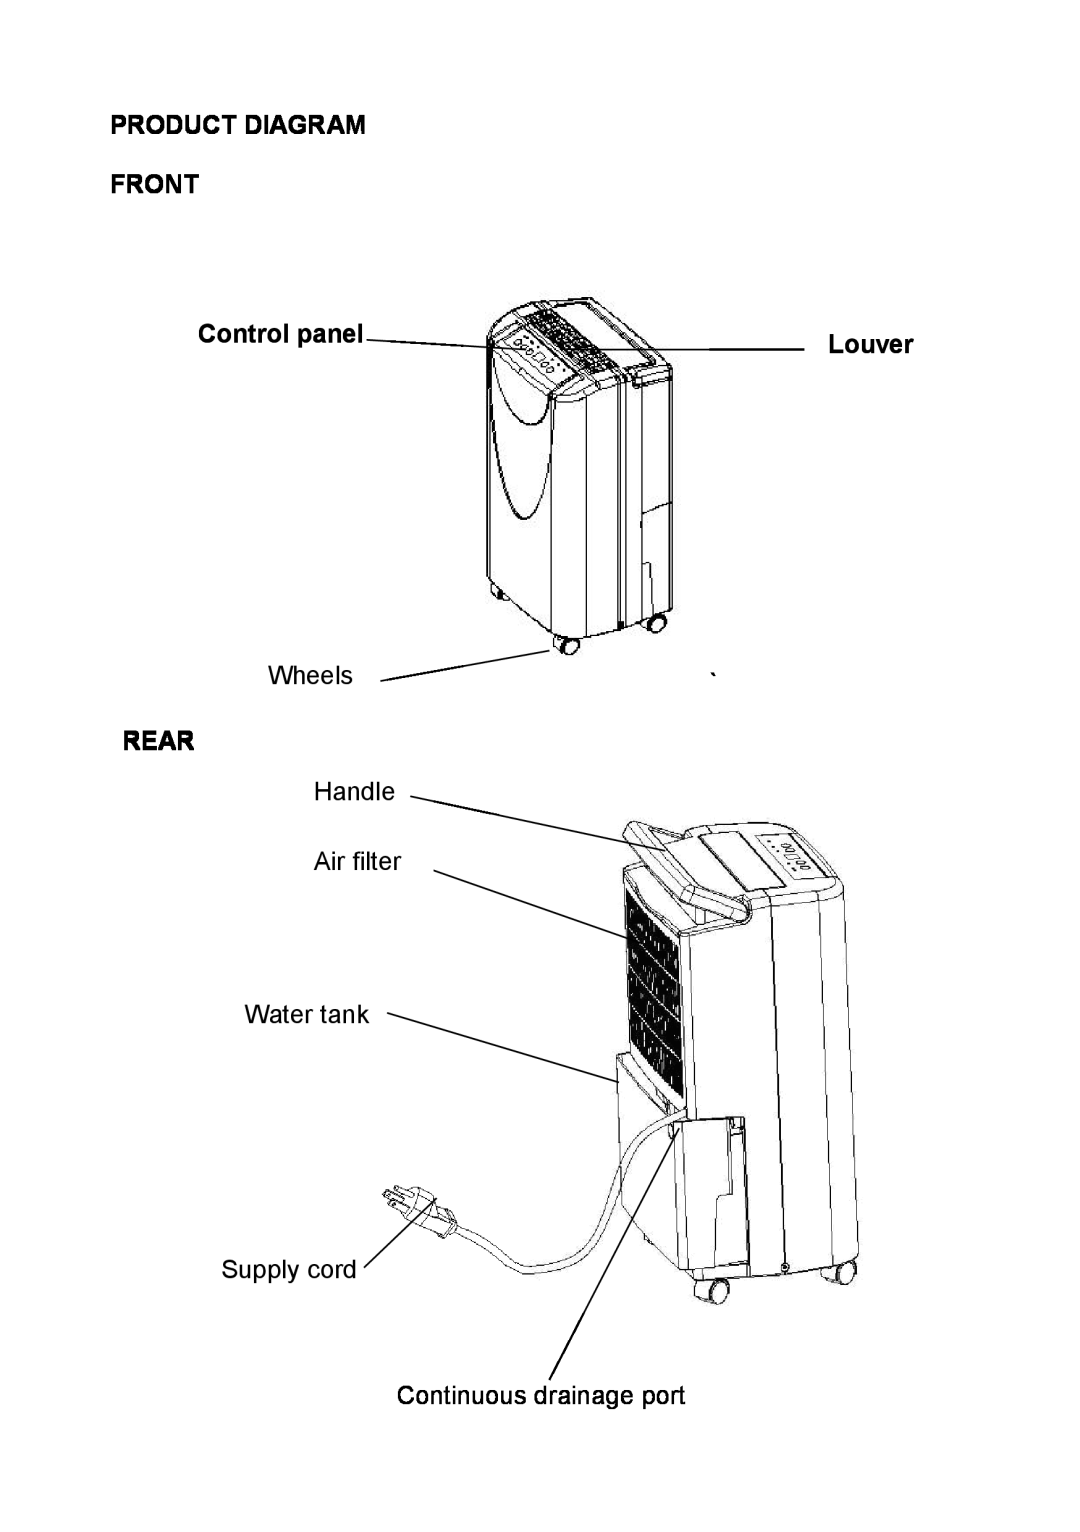 NewAir AD-400 manual Product Diagram Front, Control panel, Louver, Rear, Wheels`, Handle Air filter Water tank Supply cord 